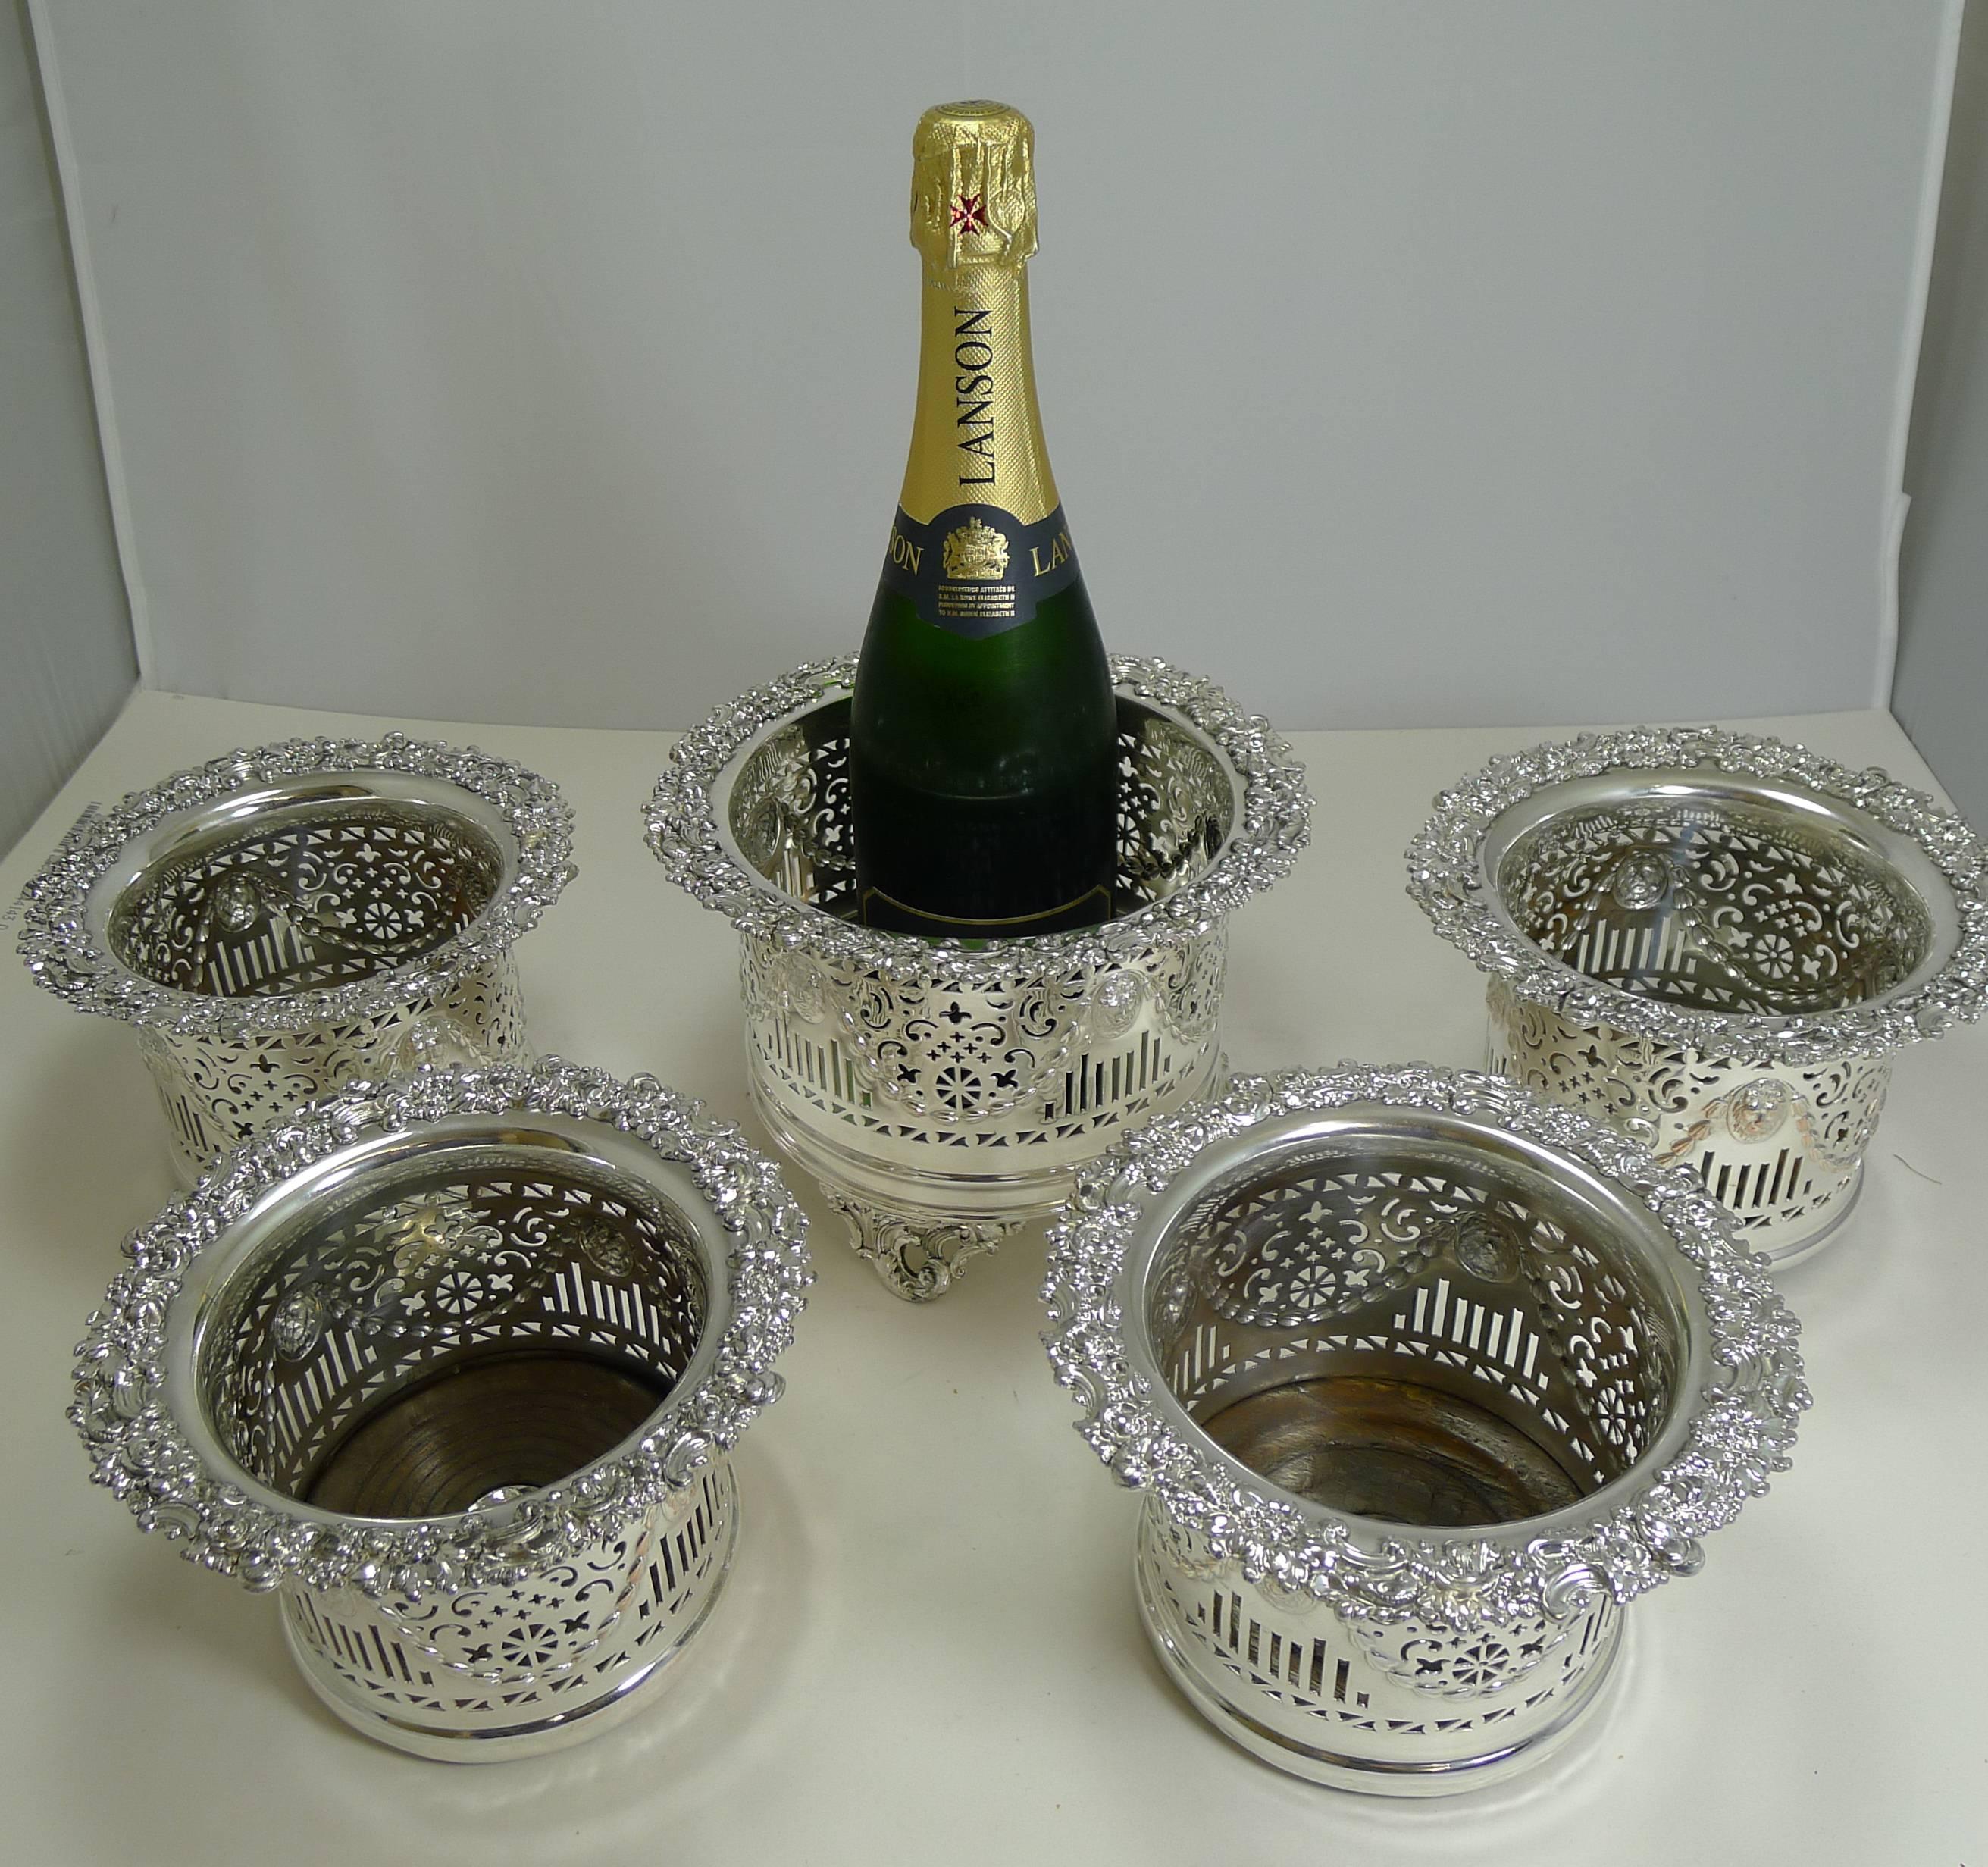 Suite Five Antique English Silver Plated Wine / Champagne Coasters or Holders C 4